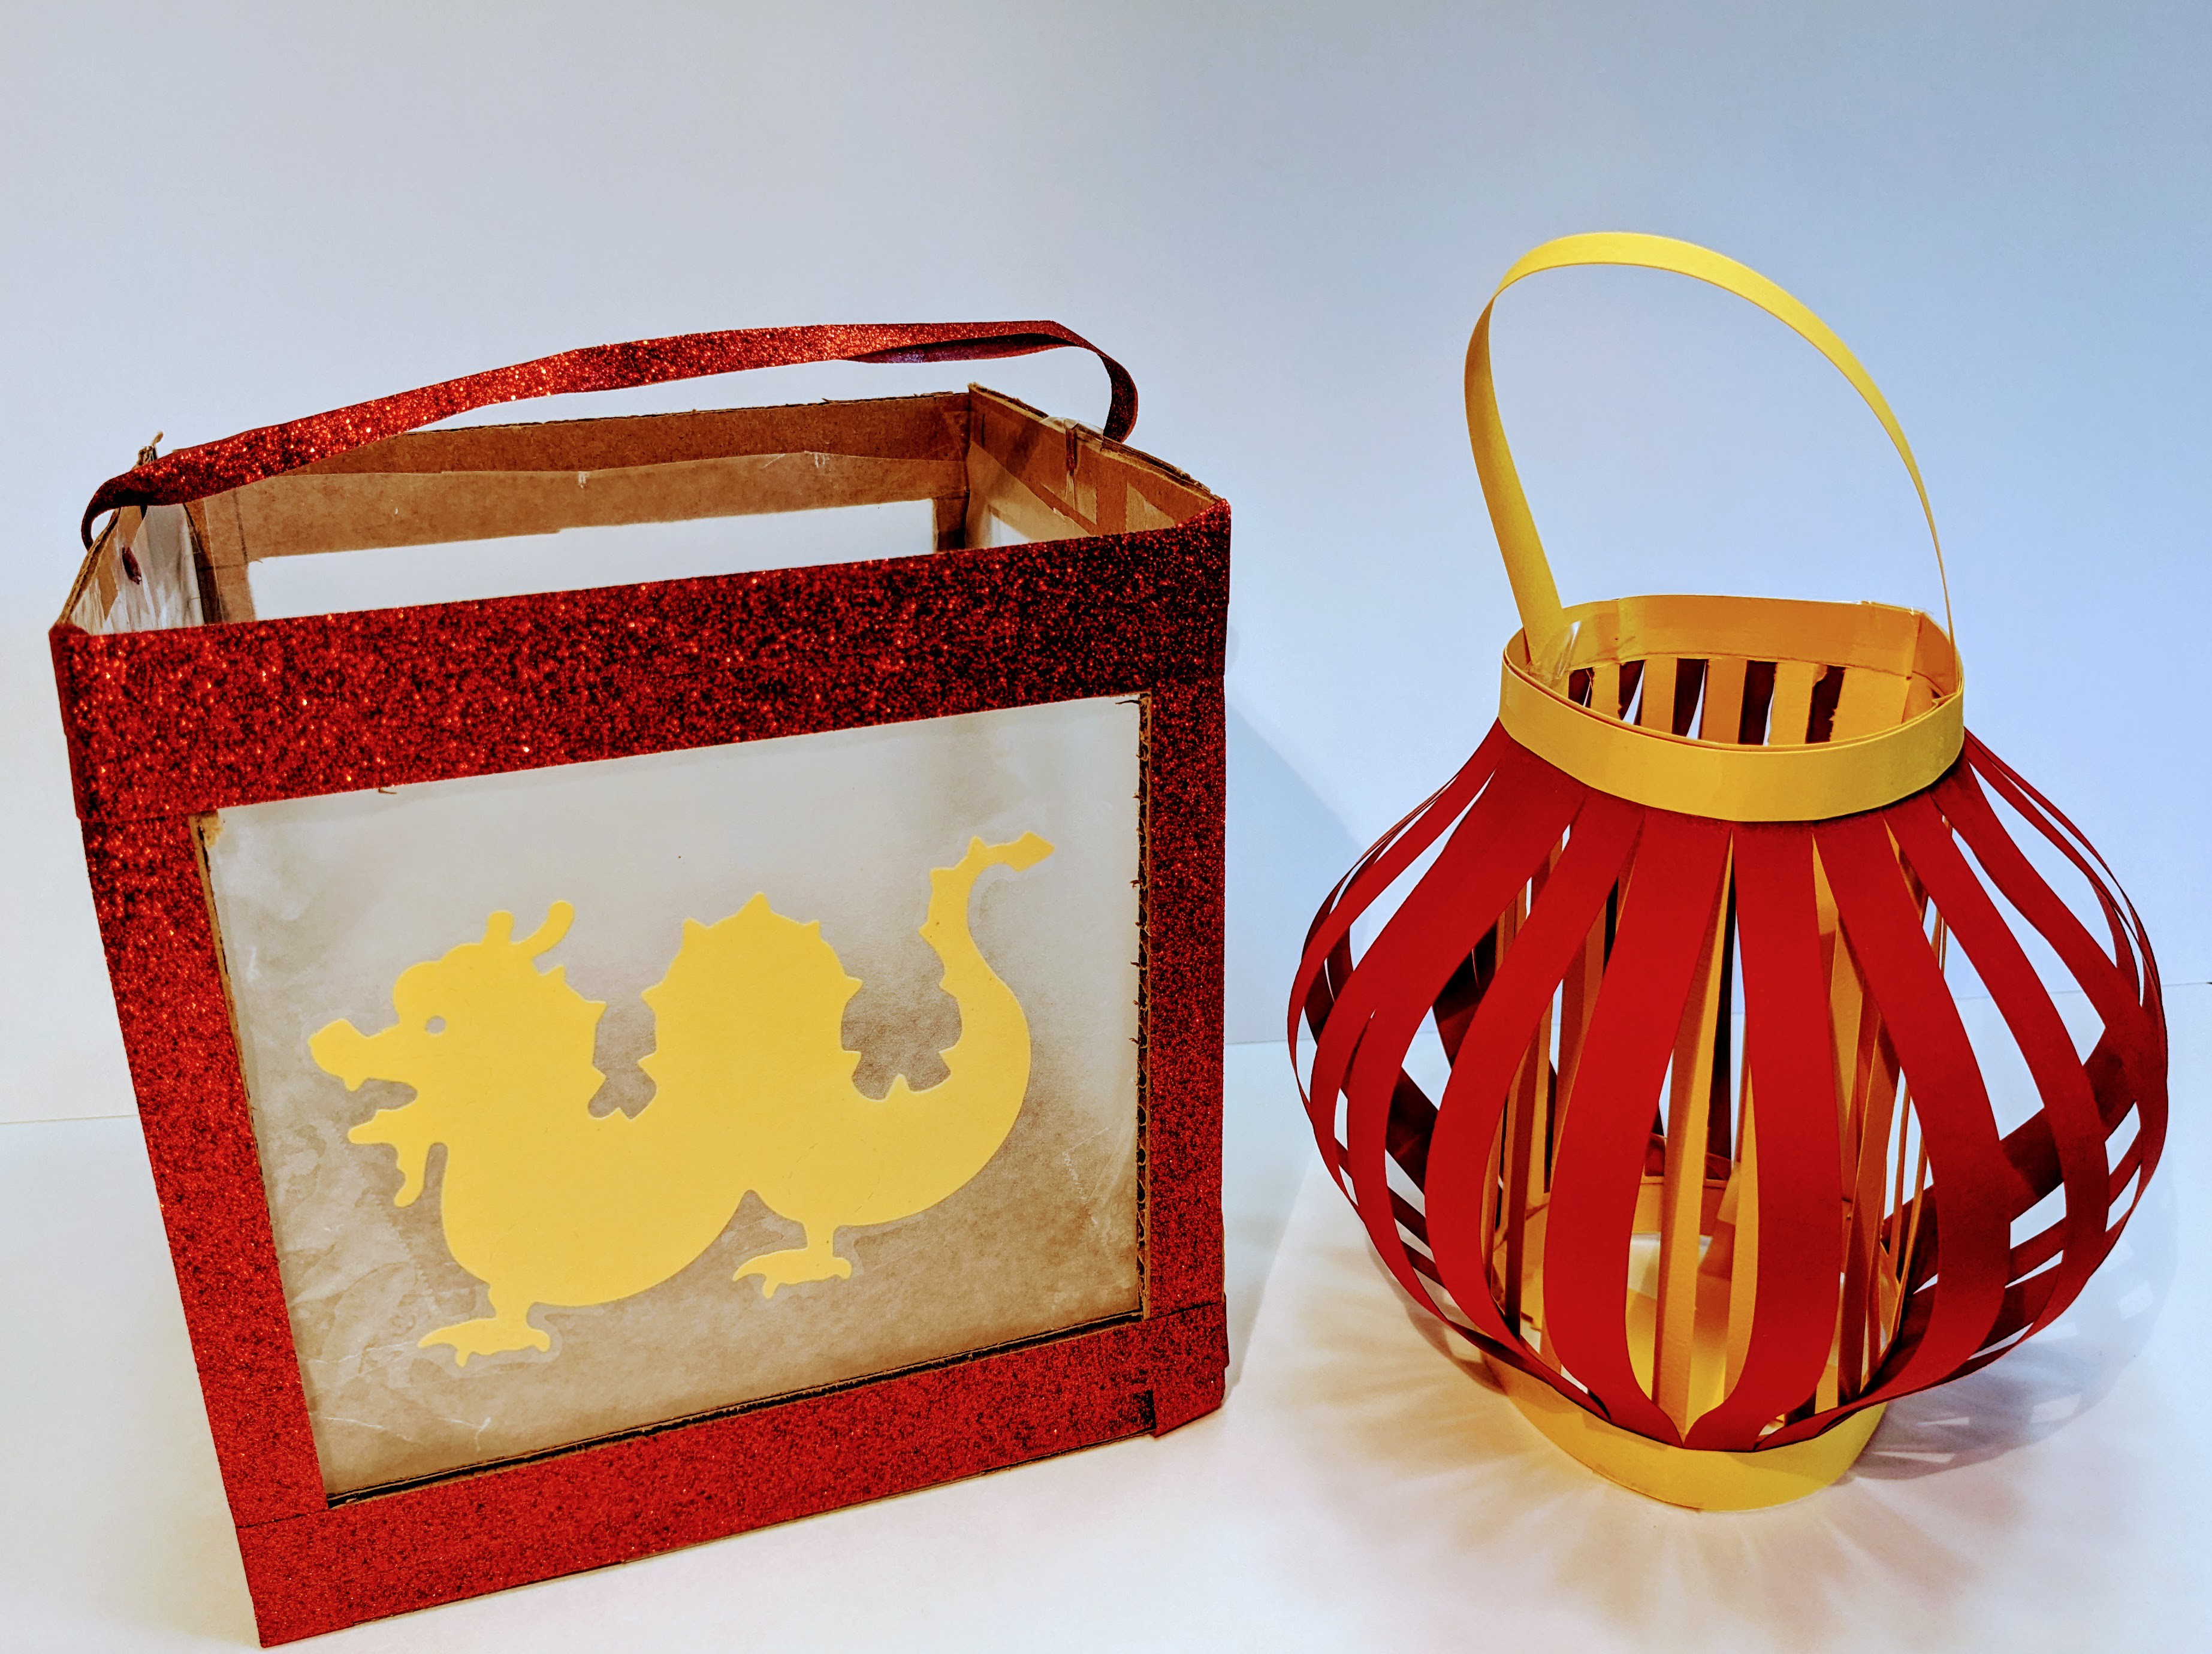 Two red and yellow paper lanterns made for Lunar New Year. 